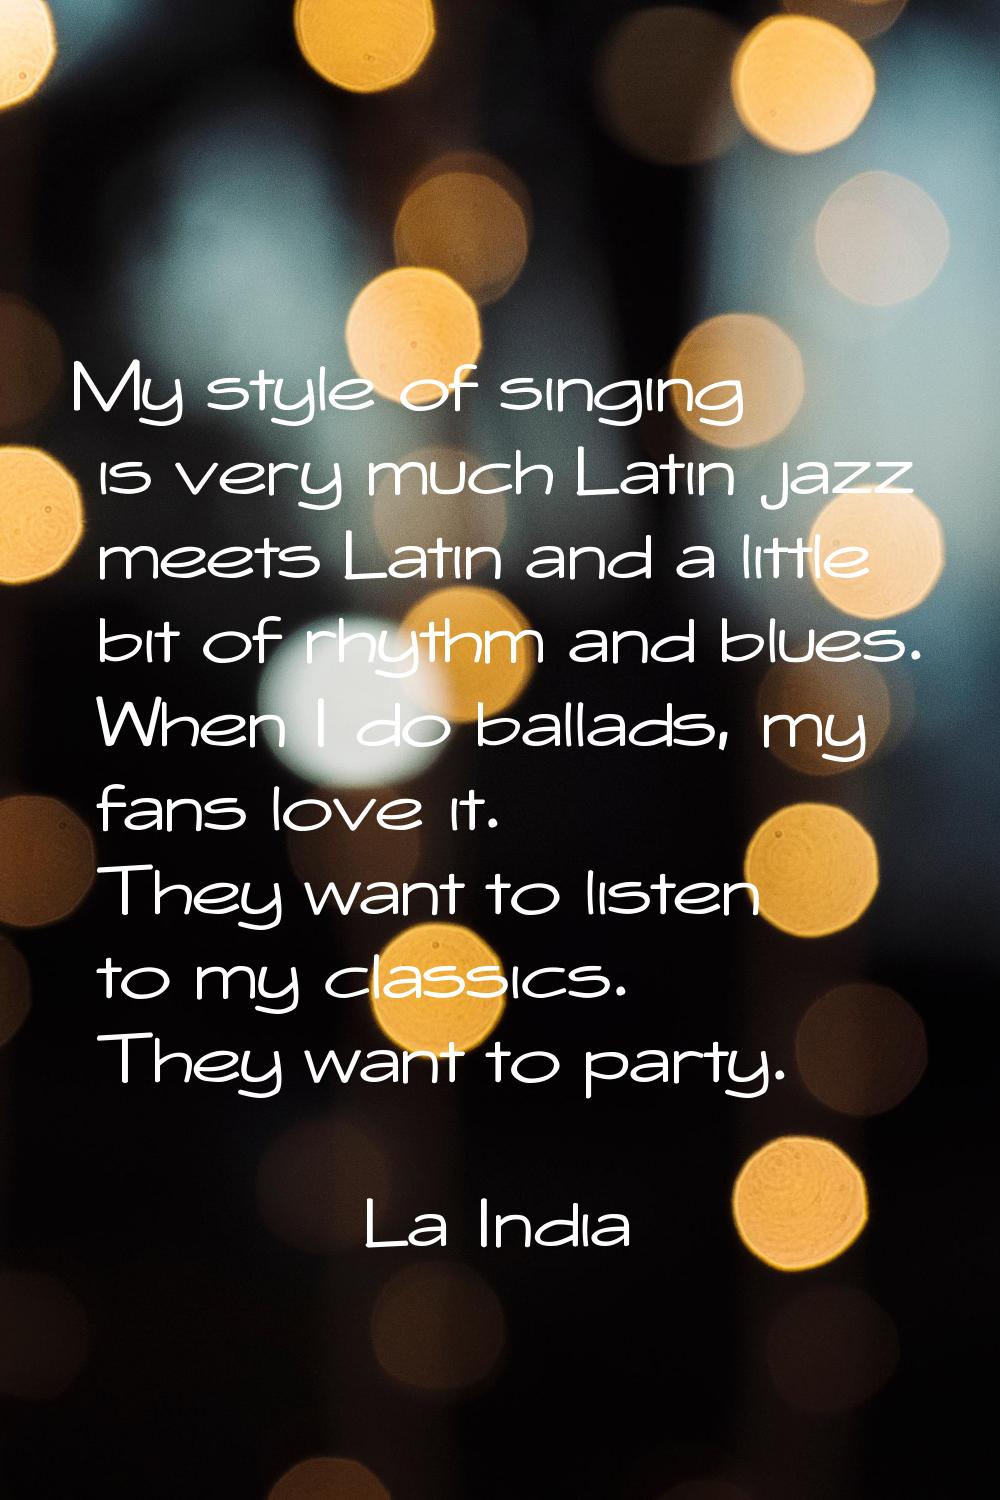 My style of singing is very much Latin jazz meets Latin and a little bit of rhythm and blues. When 